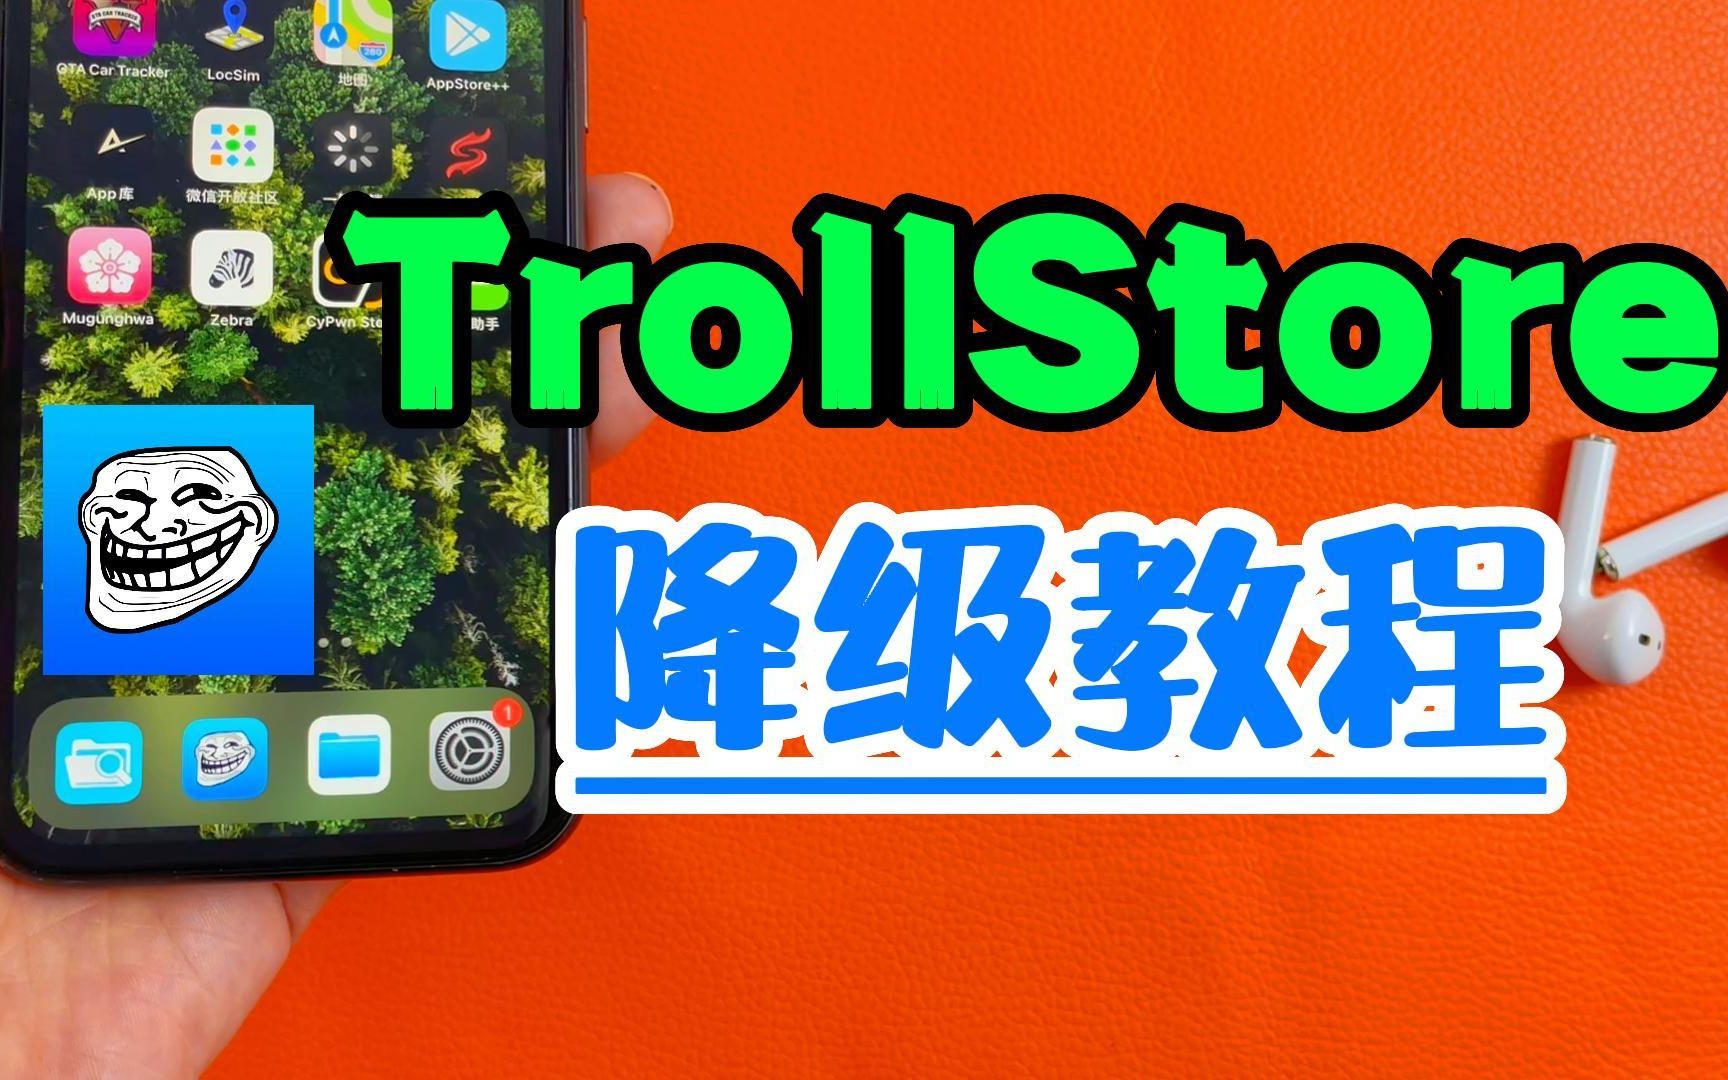 How to install TrollStore on jailbroken iOS 14.0-14.8.1 devices